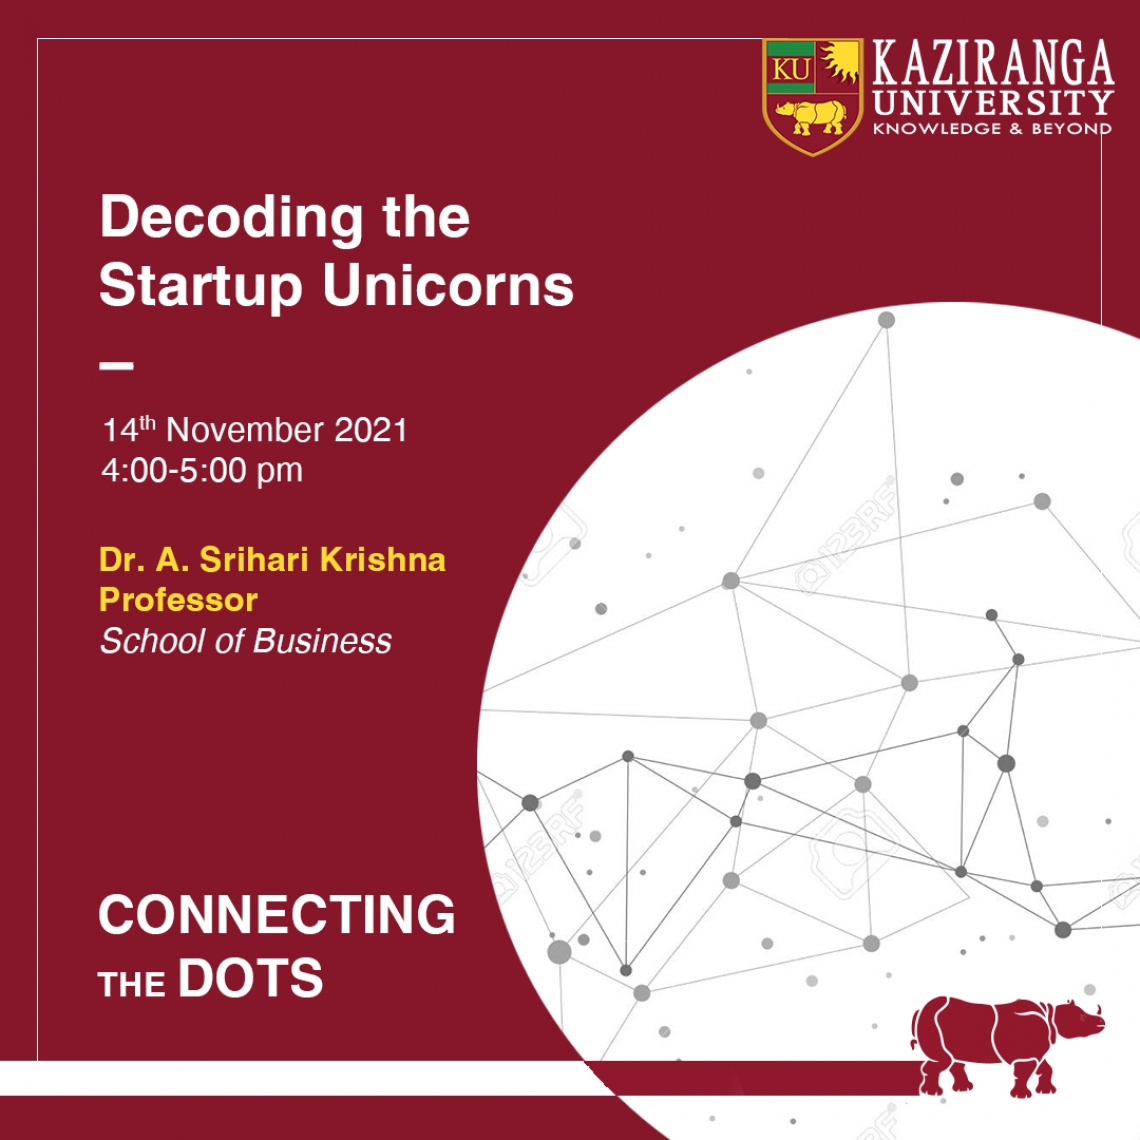 Weekend Webinar, Connecting the Dots on "Decoding the startup Unicorns"